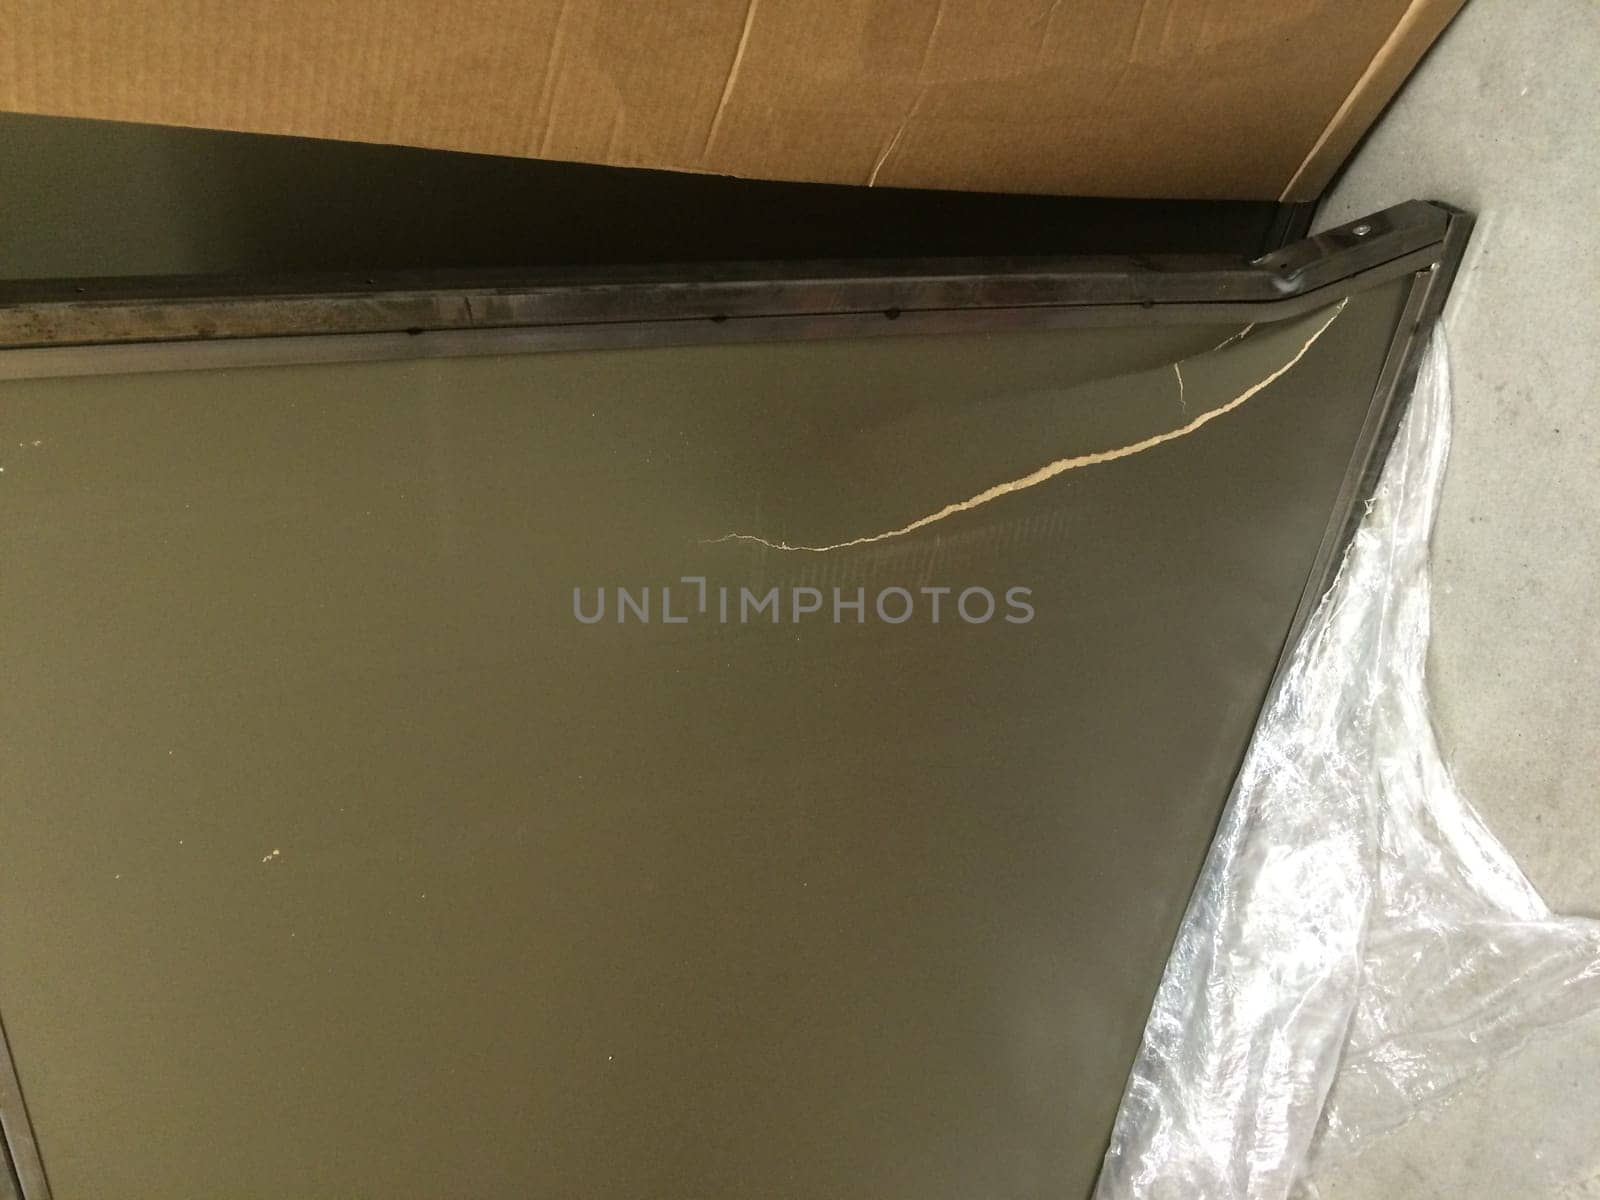 Damaged Store Fixture, Damaged in Shipping, Retail Store Set Up. High quality photo